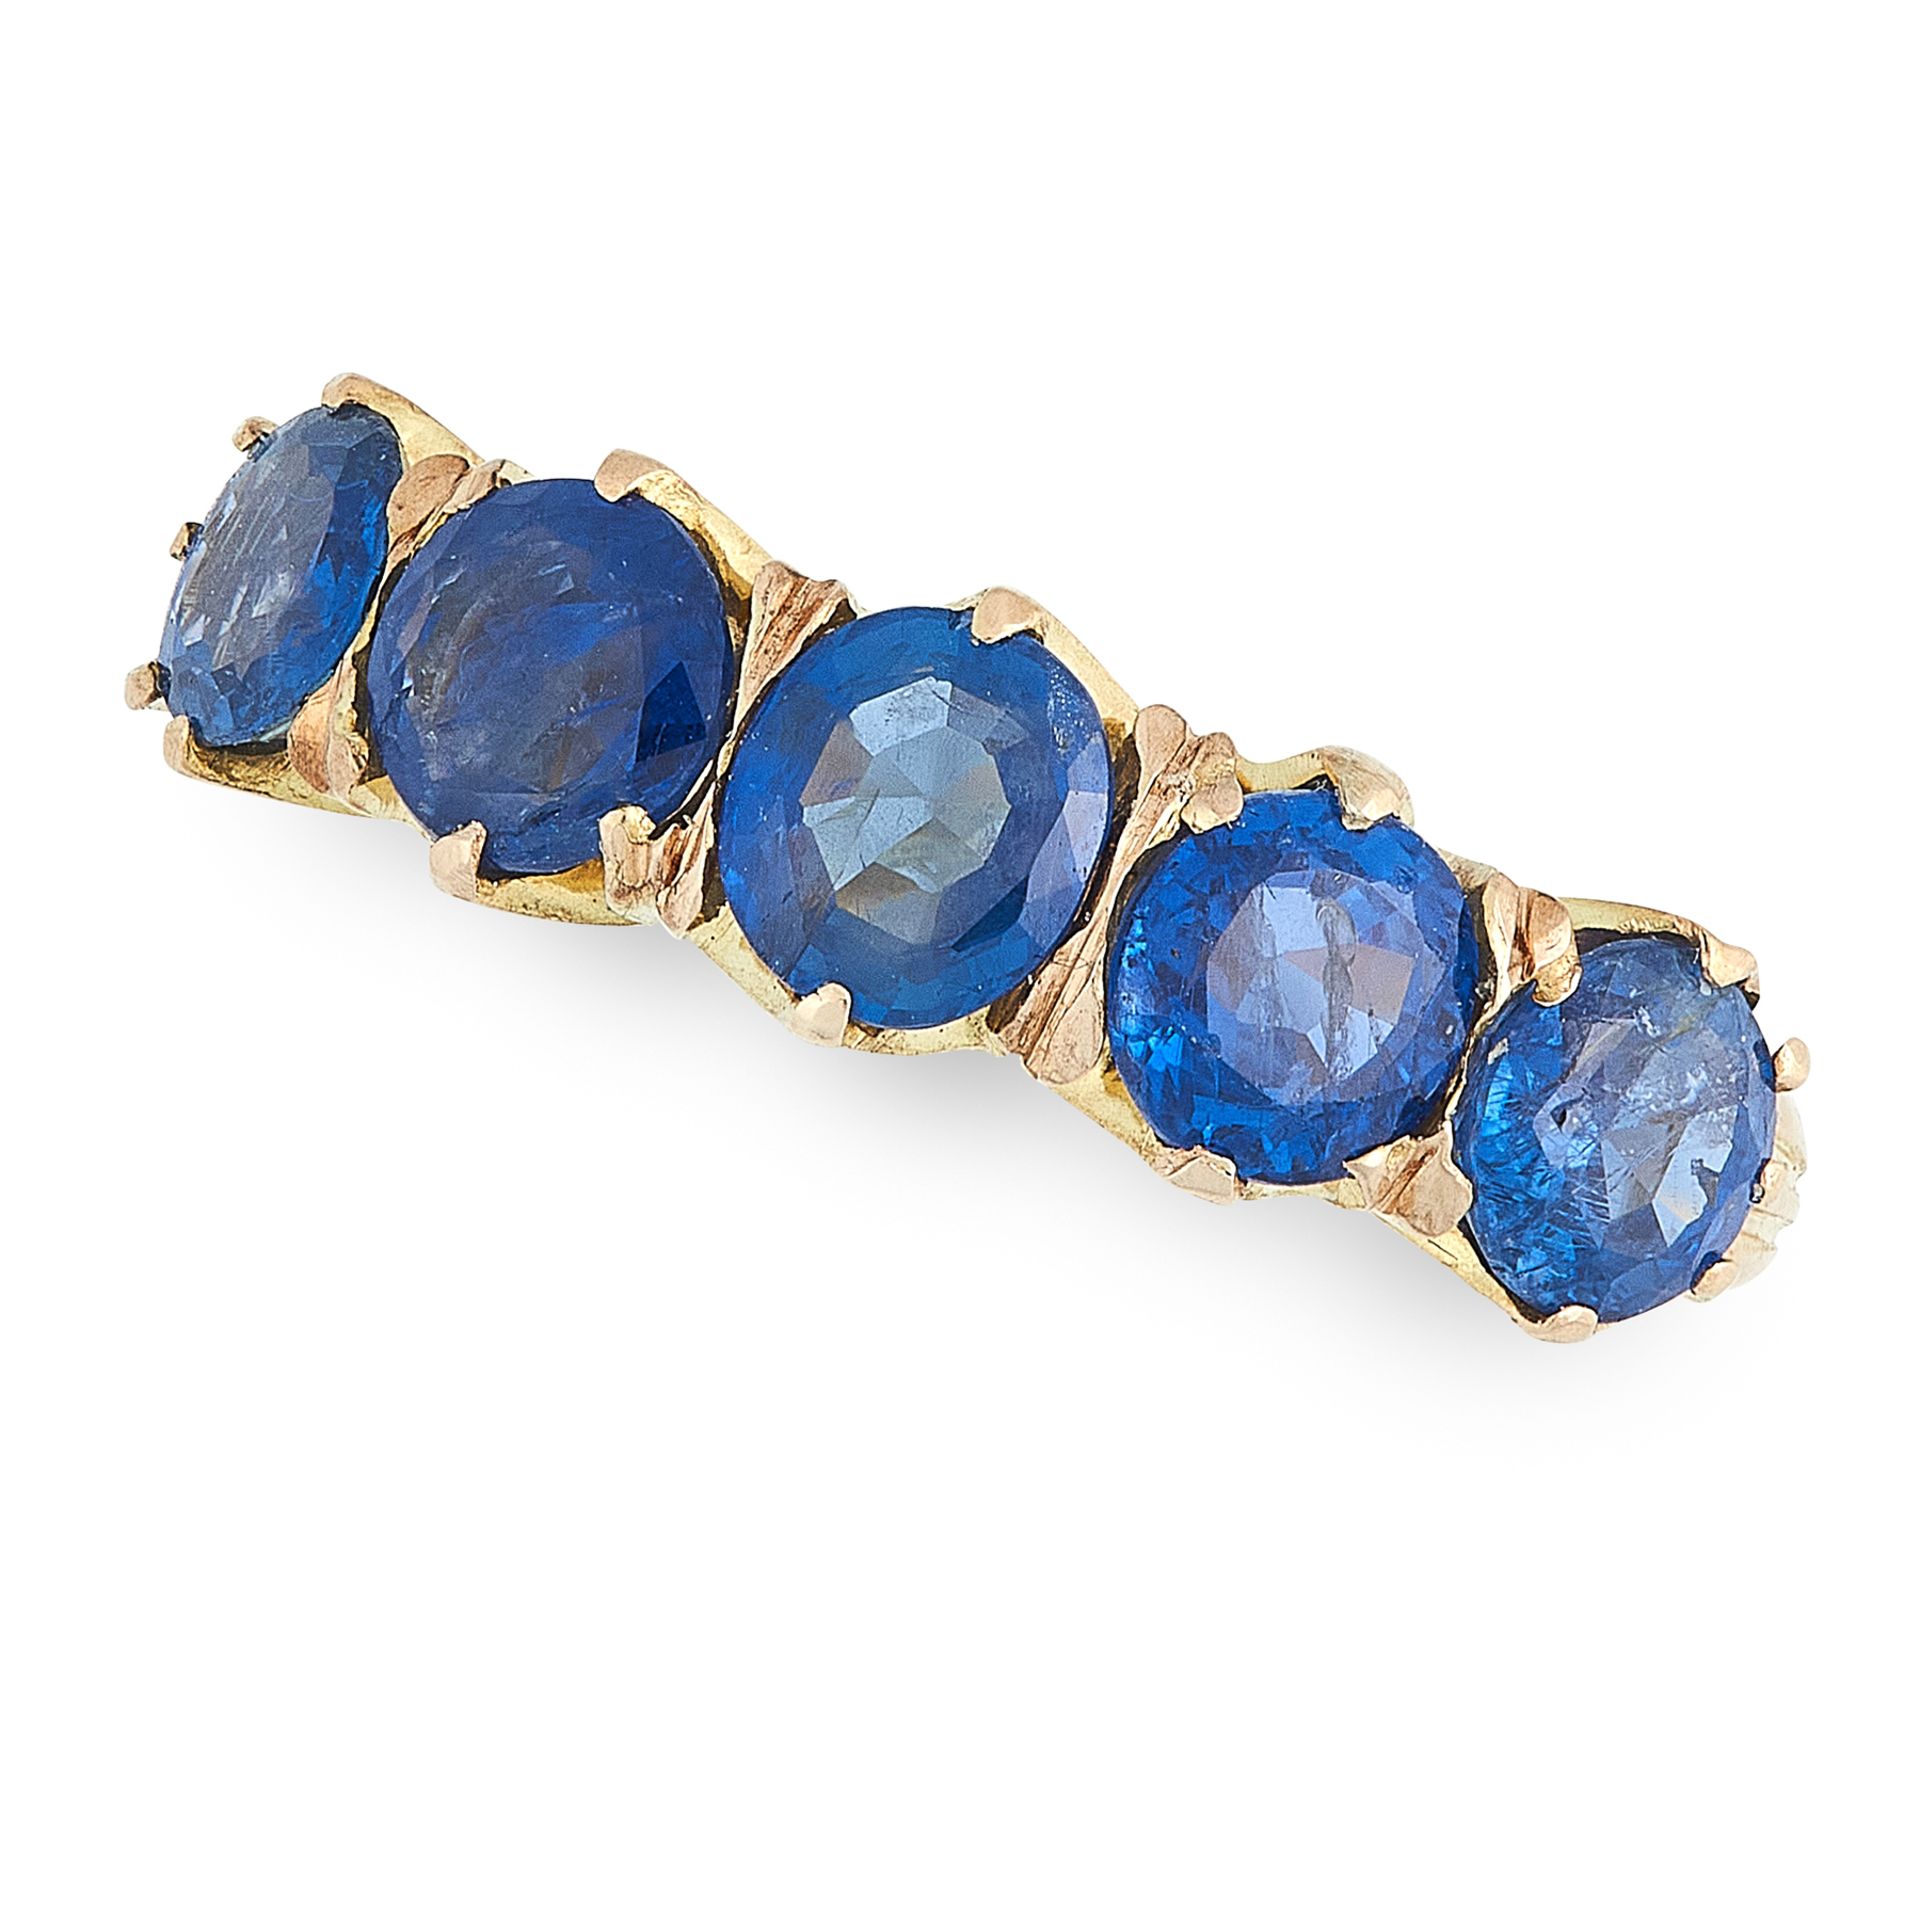 A SAPPHIRE FIVE STONE RING in yellow gold, set with a row of five graduated round cut sapphires